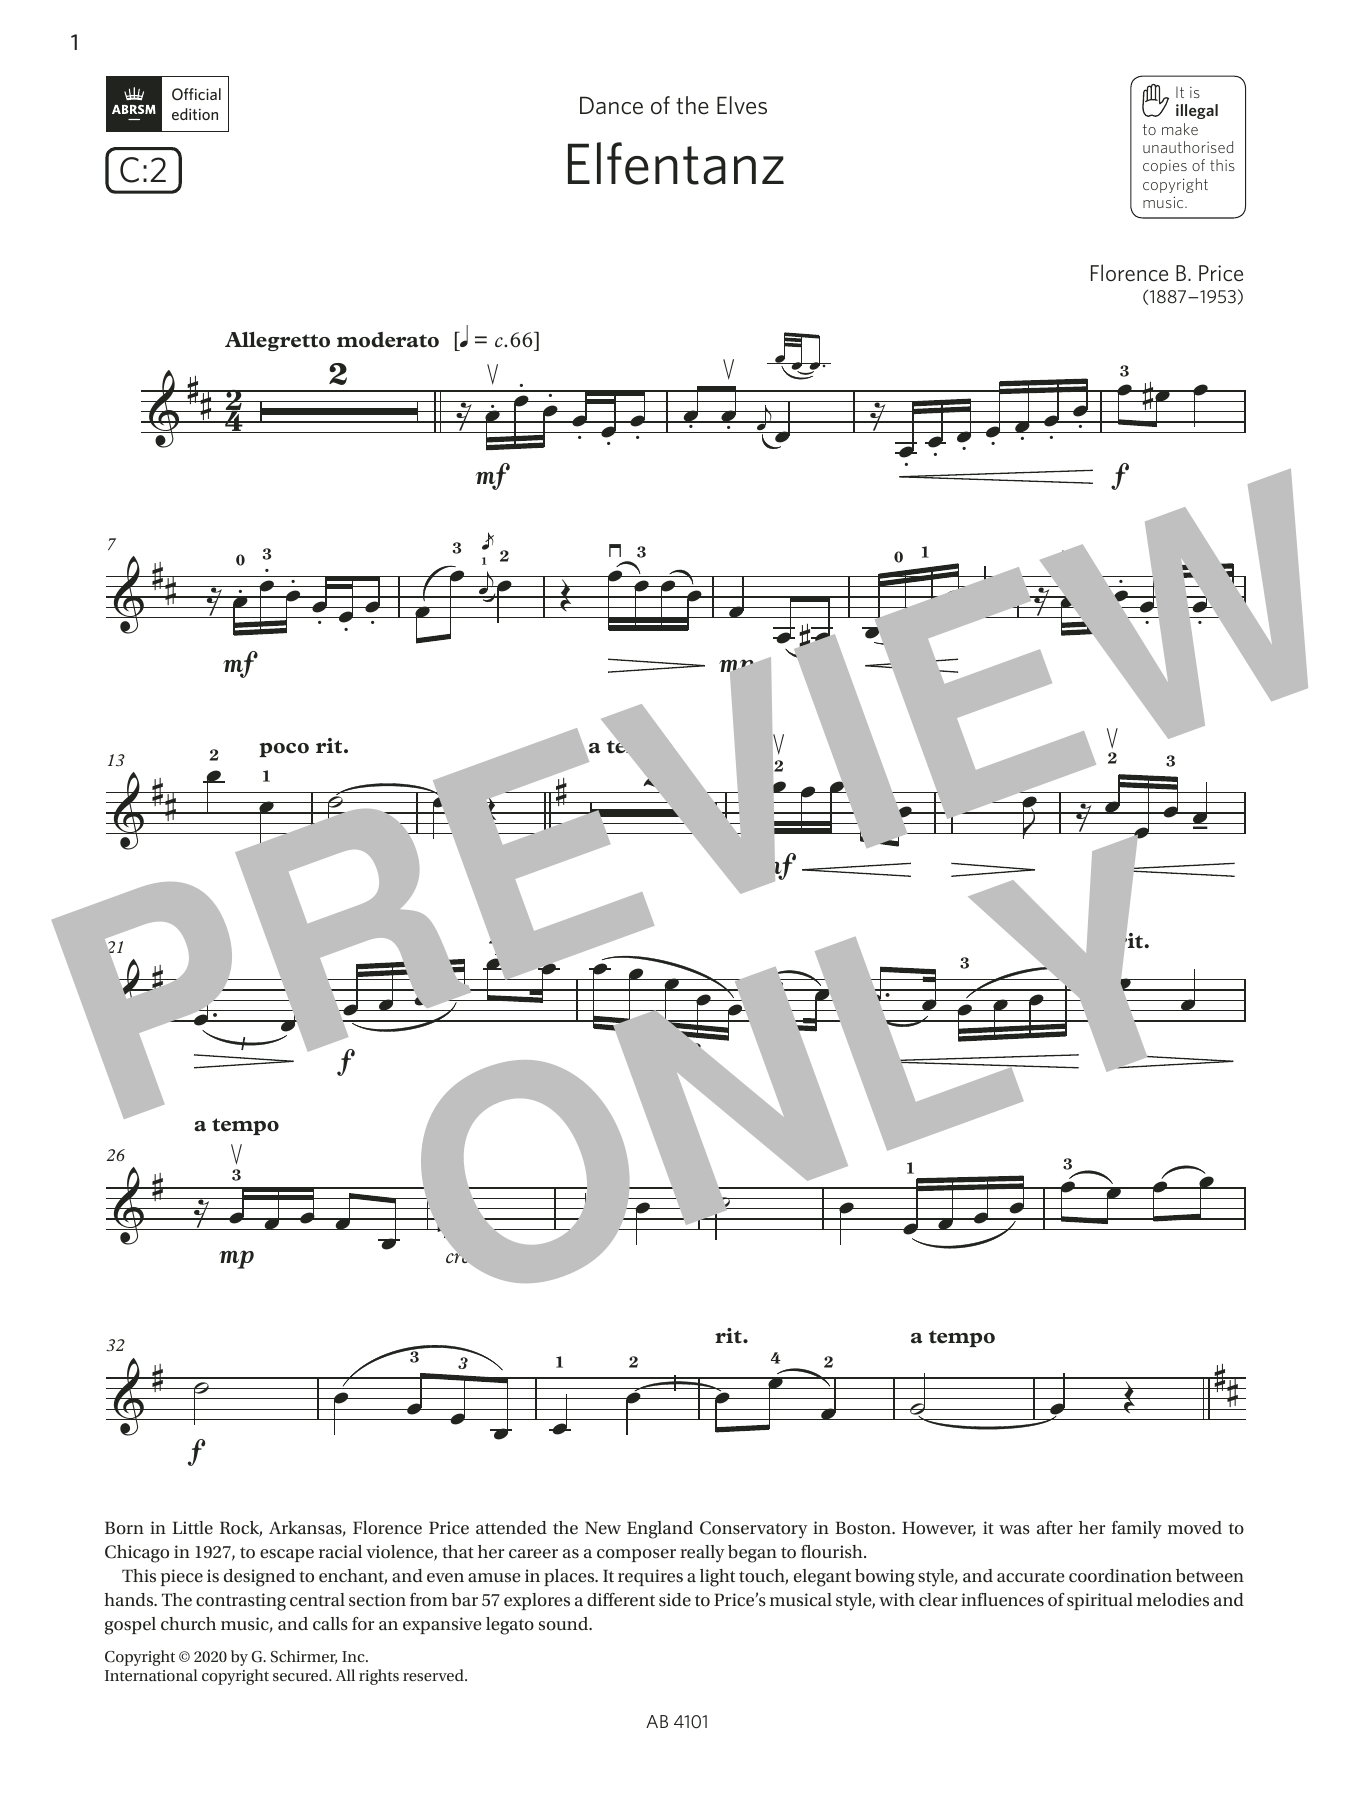 Download Florence B. Price Elfentanz (Grade 7, C2, from the ABRSM Sheet Music